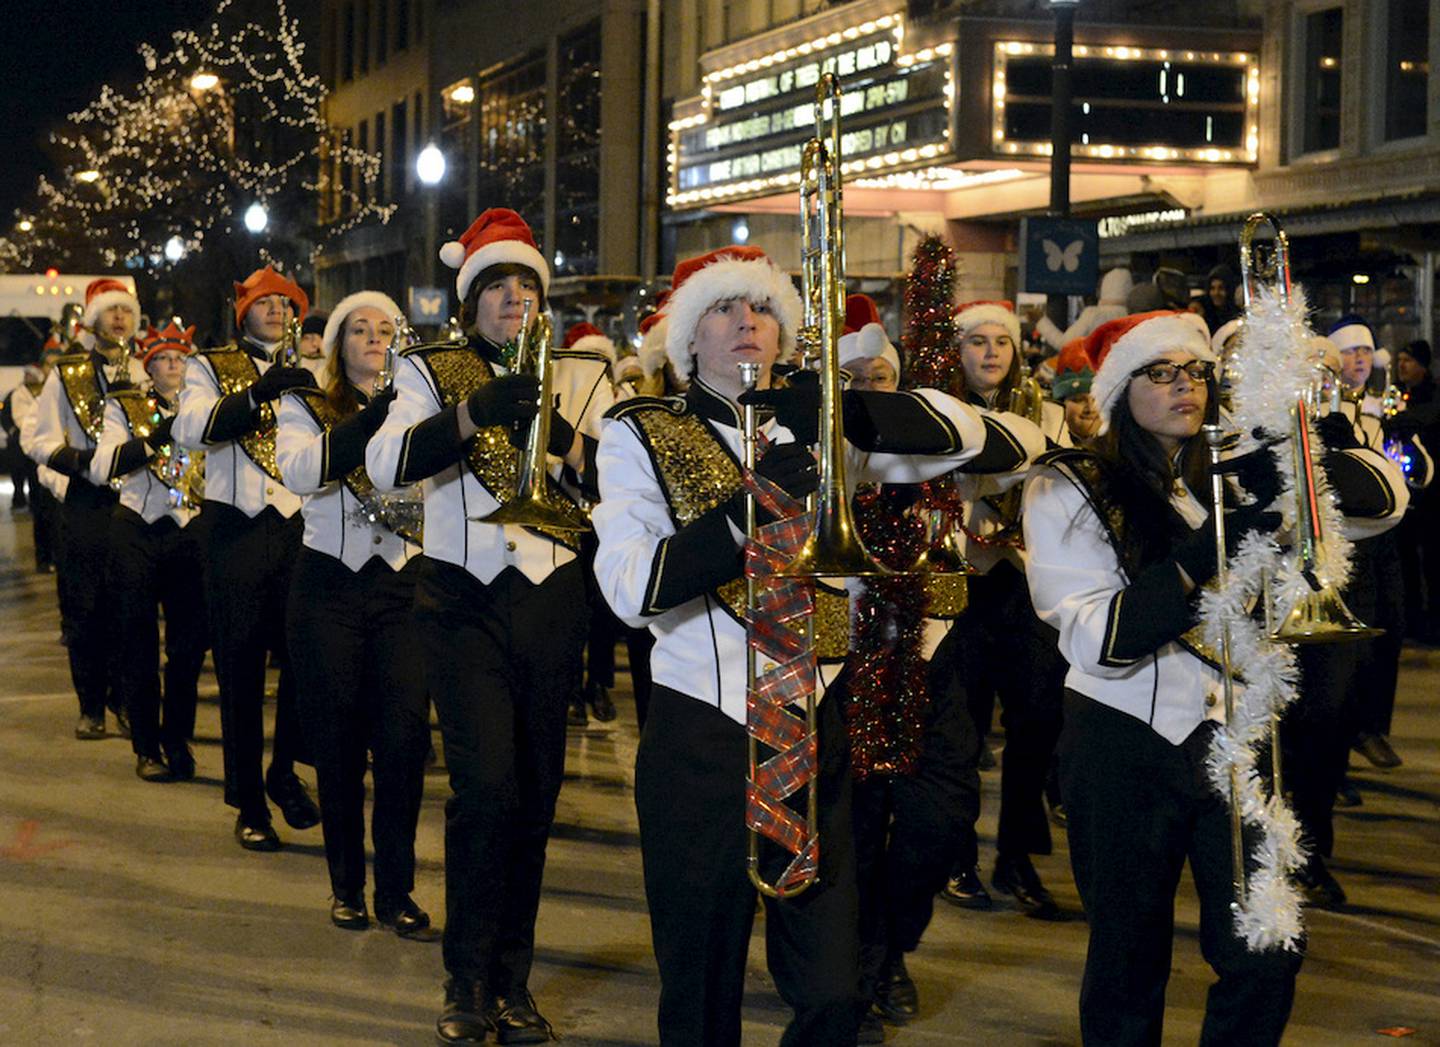 Joliet Township West marching band members with santa hats on at the Light up the Holidays Tree Lighting and Parade Van Buren Plaza Downtown Joliet,Illinois on Friday, November 29, 2013. | Larry Kane/For Sun-Times Media